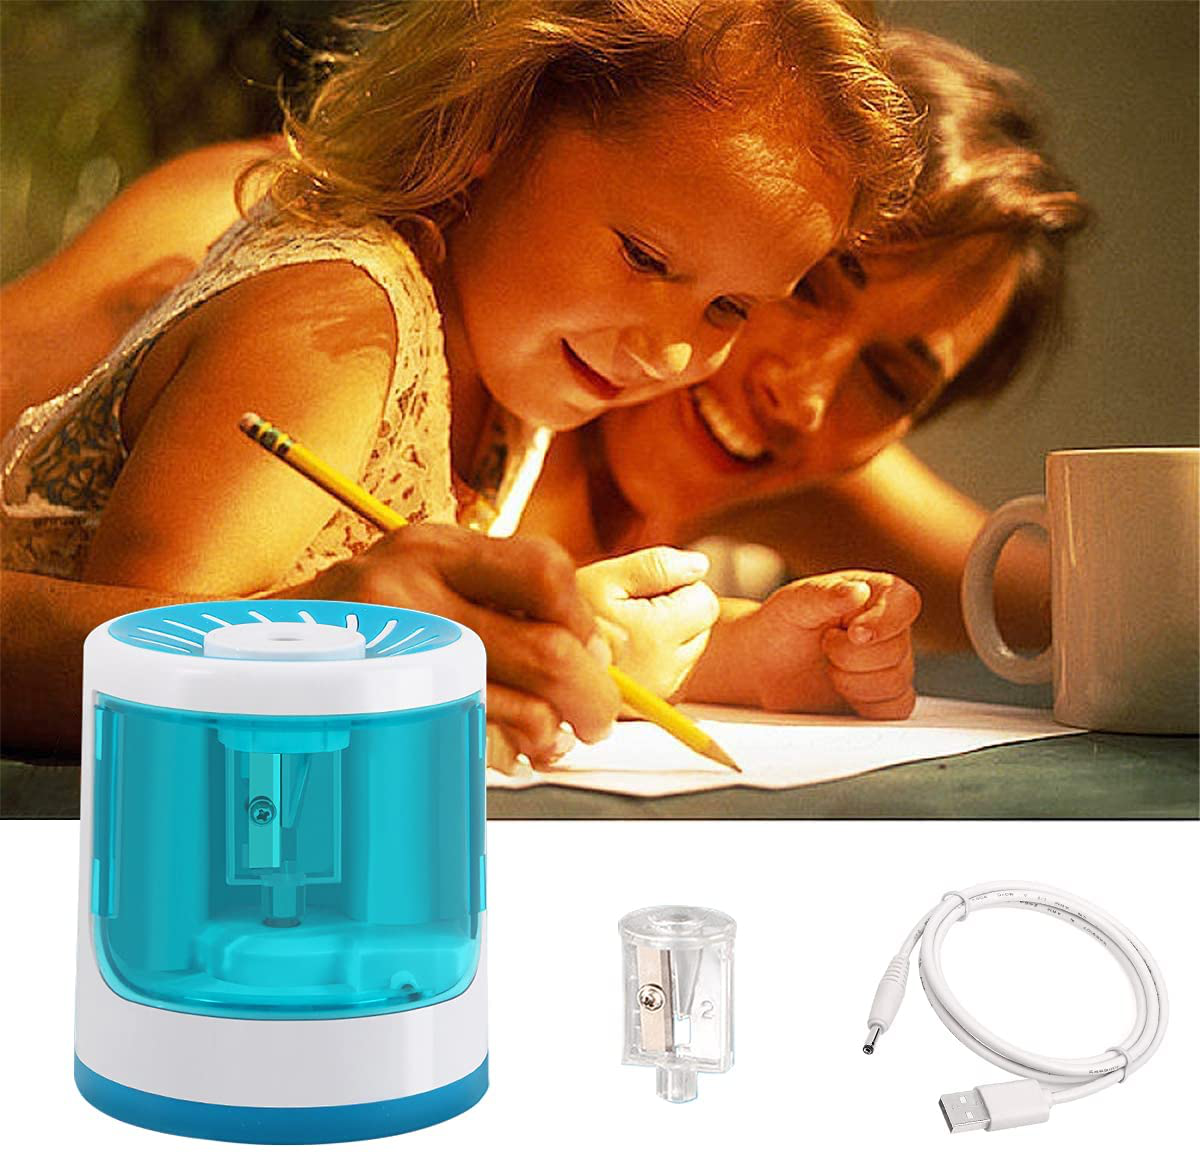 Pencil Sharpeners Battery Operated, Electric Pencil Sharpener Heavy Duty School Supplies for Kids, Suitable for Number #2 Pencil Colored Pencils & Charcoal Pencil (6-8mm), Automatic Pencil Sharpener